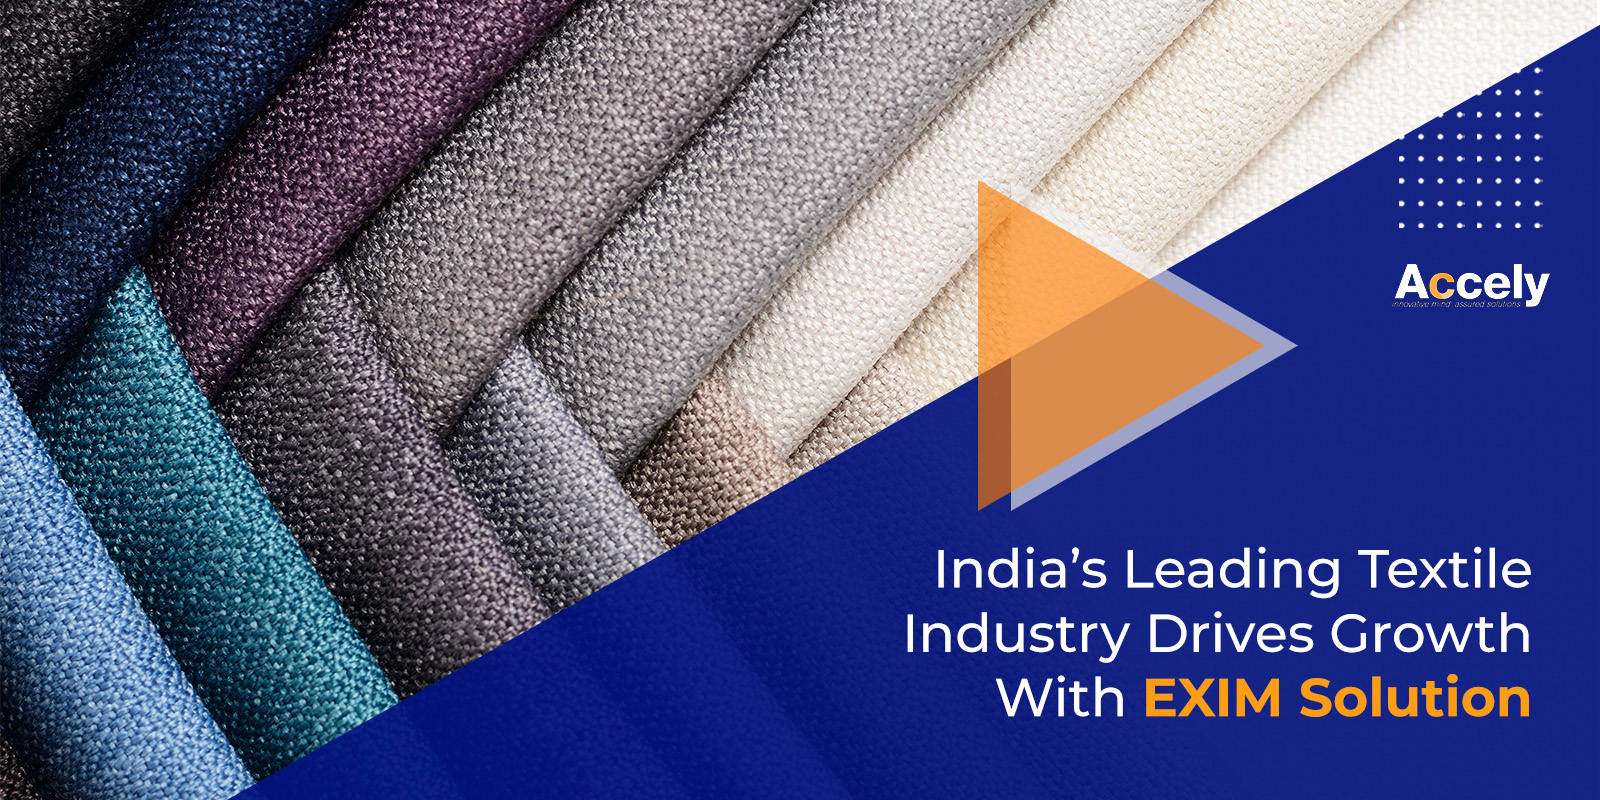 India’s Leading Textile Industry Drives Growth With EXIM Solution